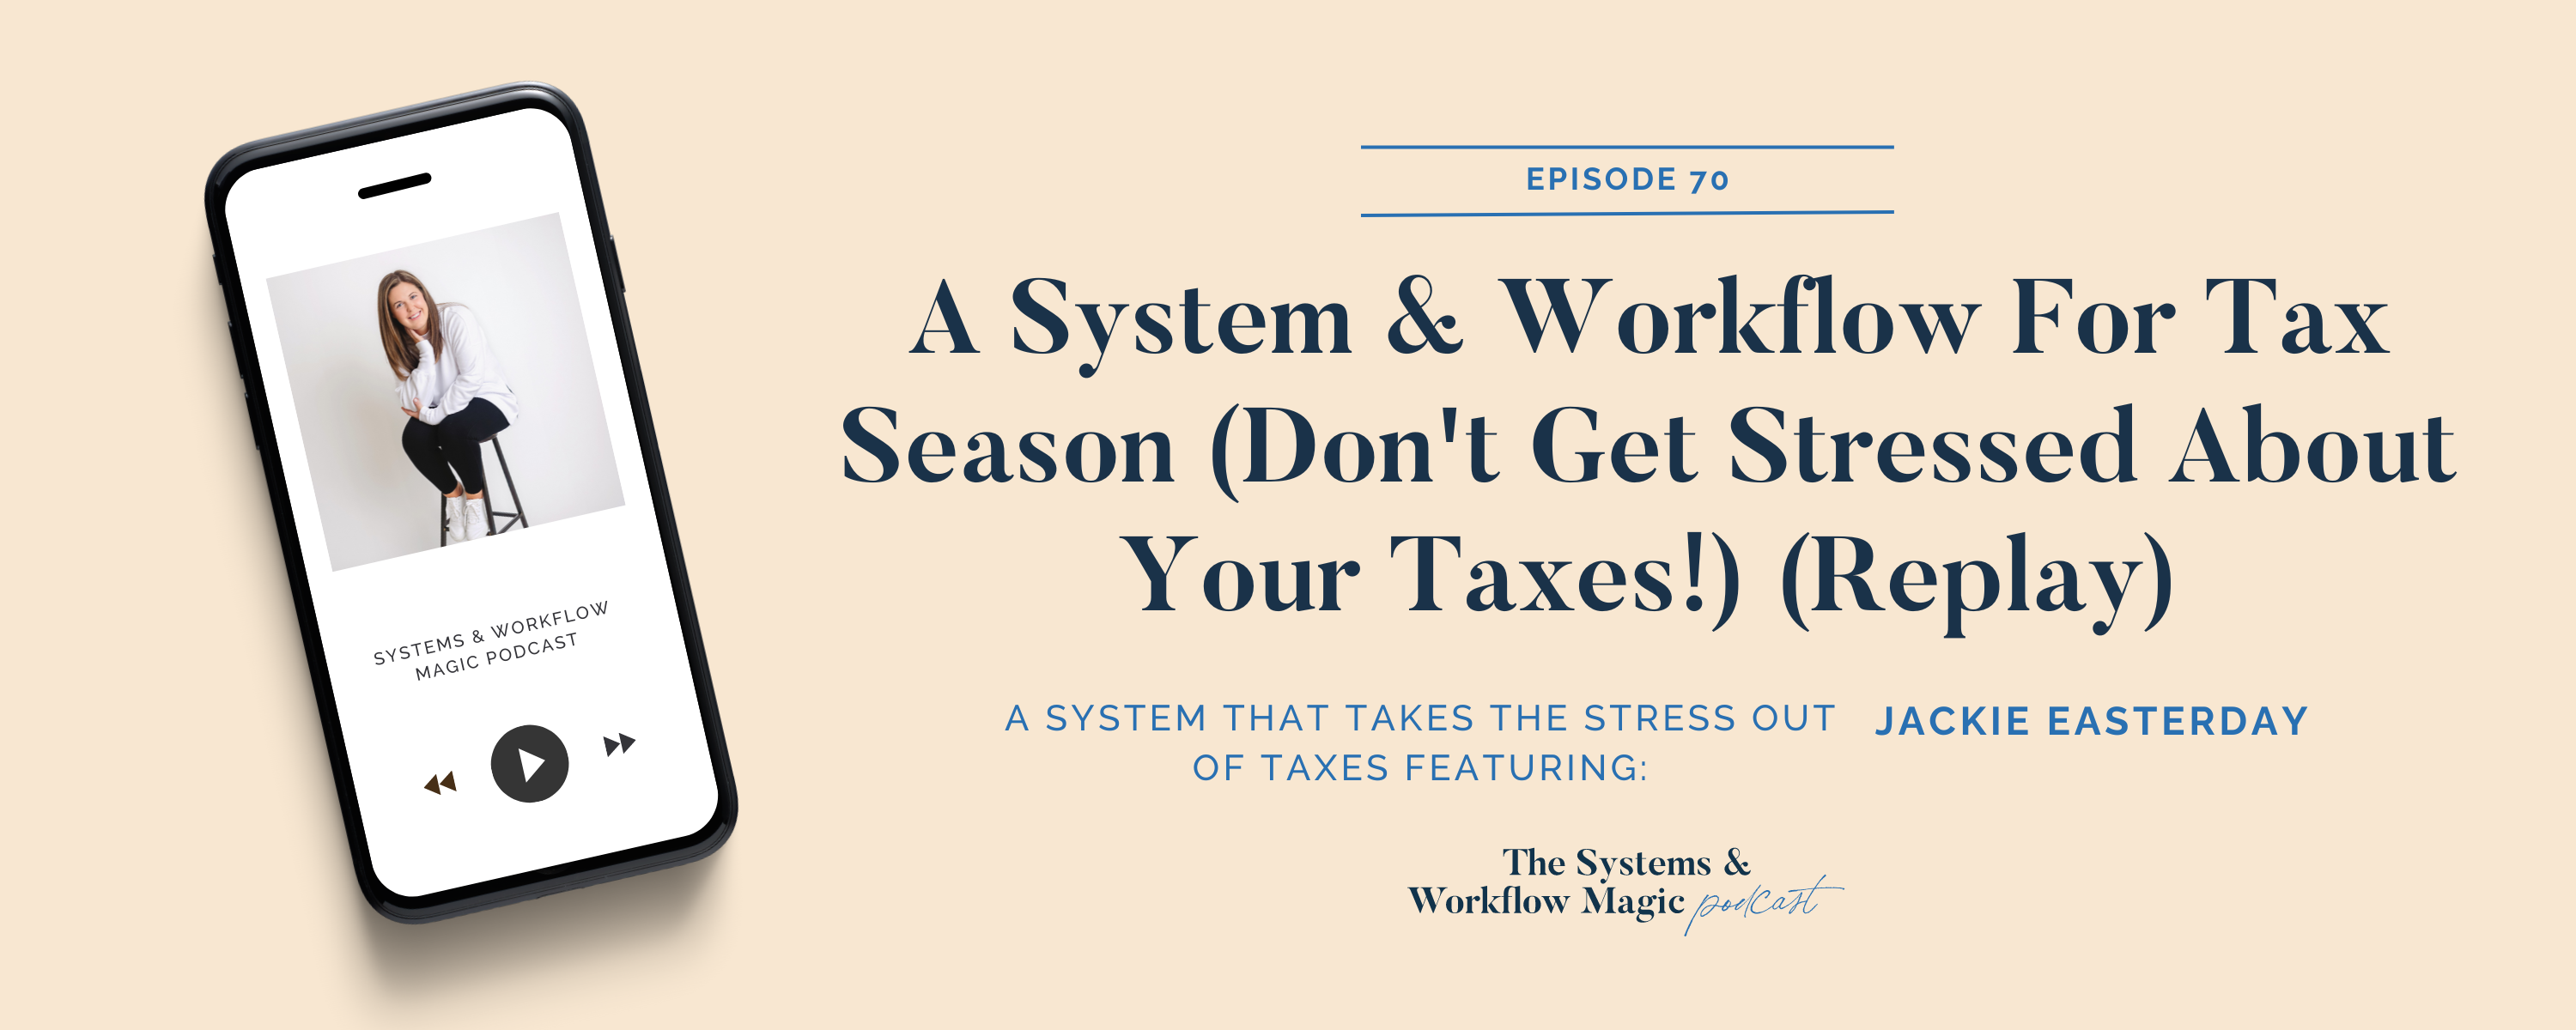 Staying-Organized-for-Tax-Season-&-What-Systems-to-Put-Into-Place-for-Your-Money